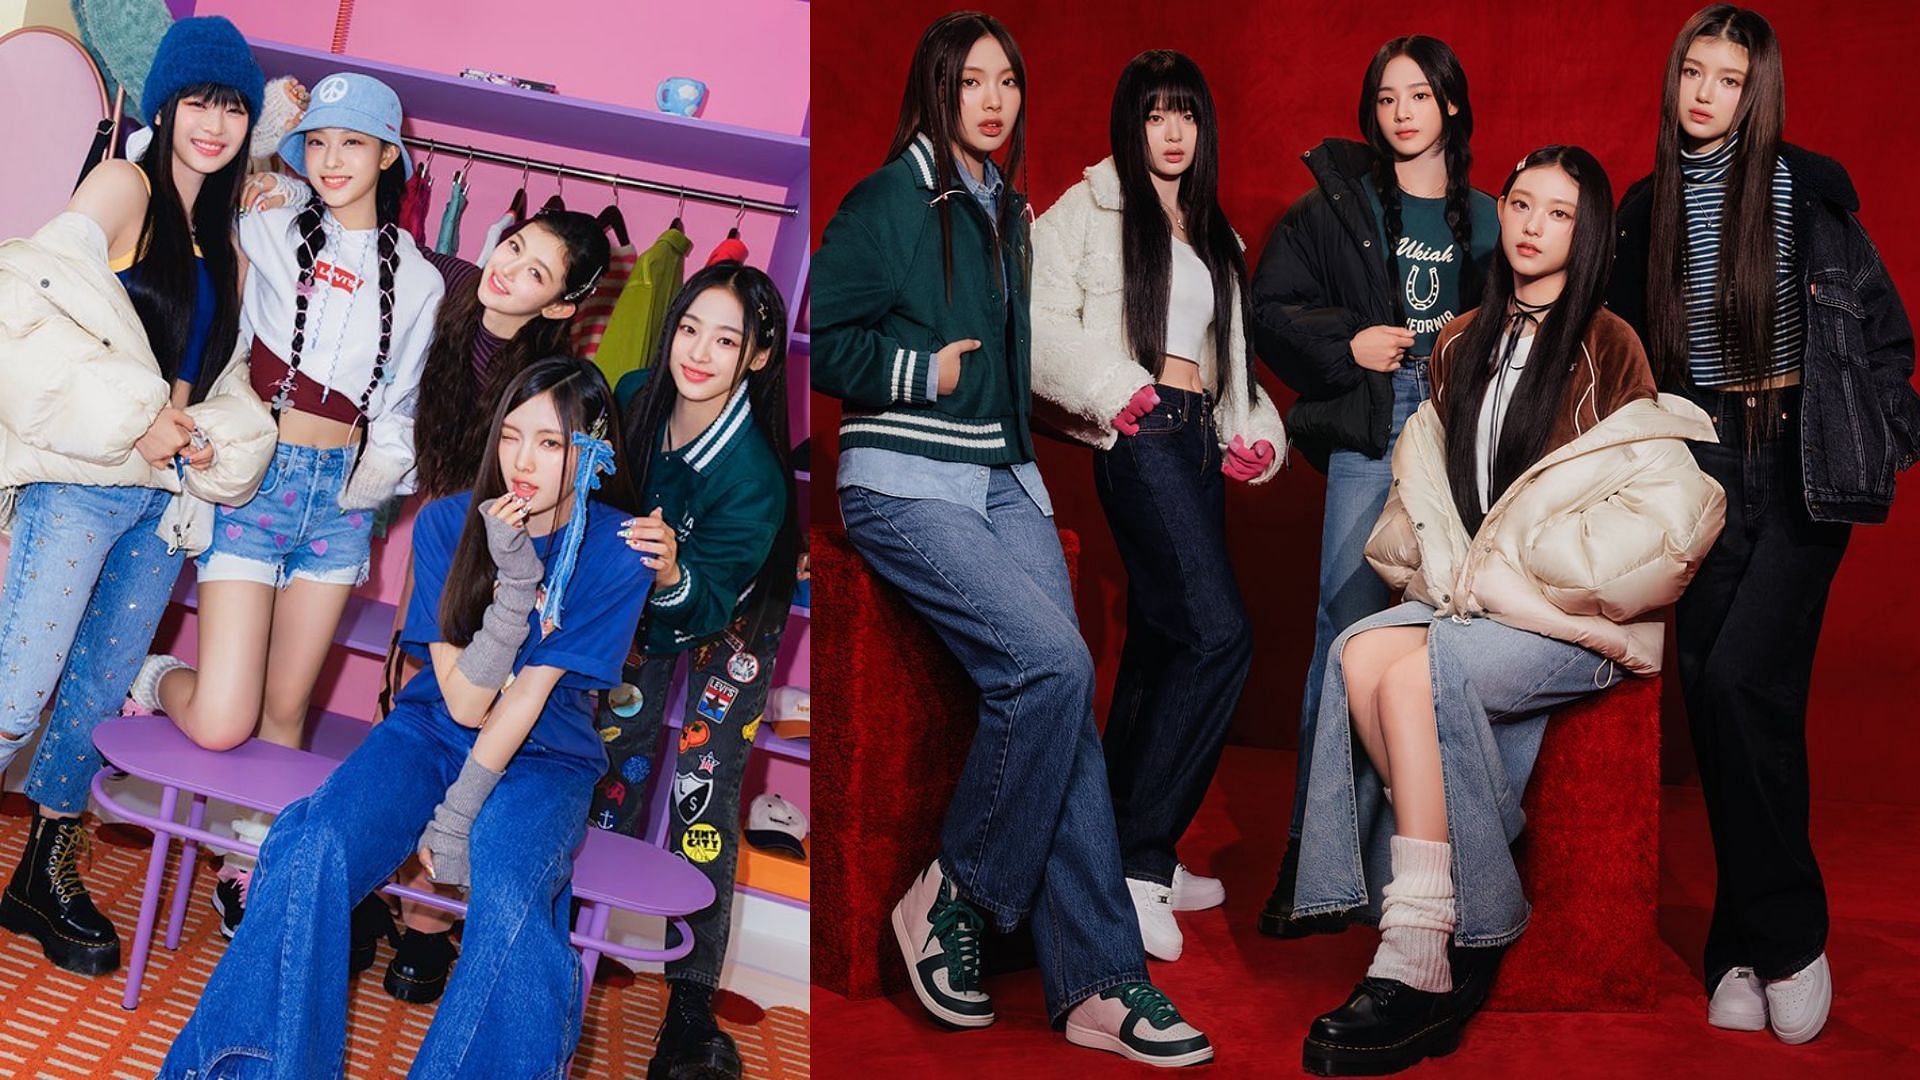 Check out the individual still cuts of NewJeans for Levi's